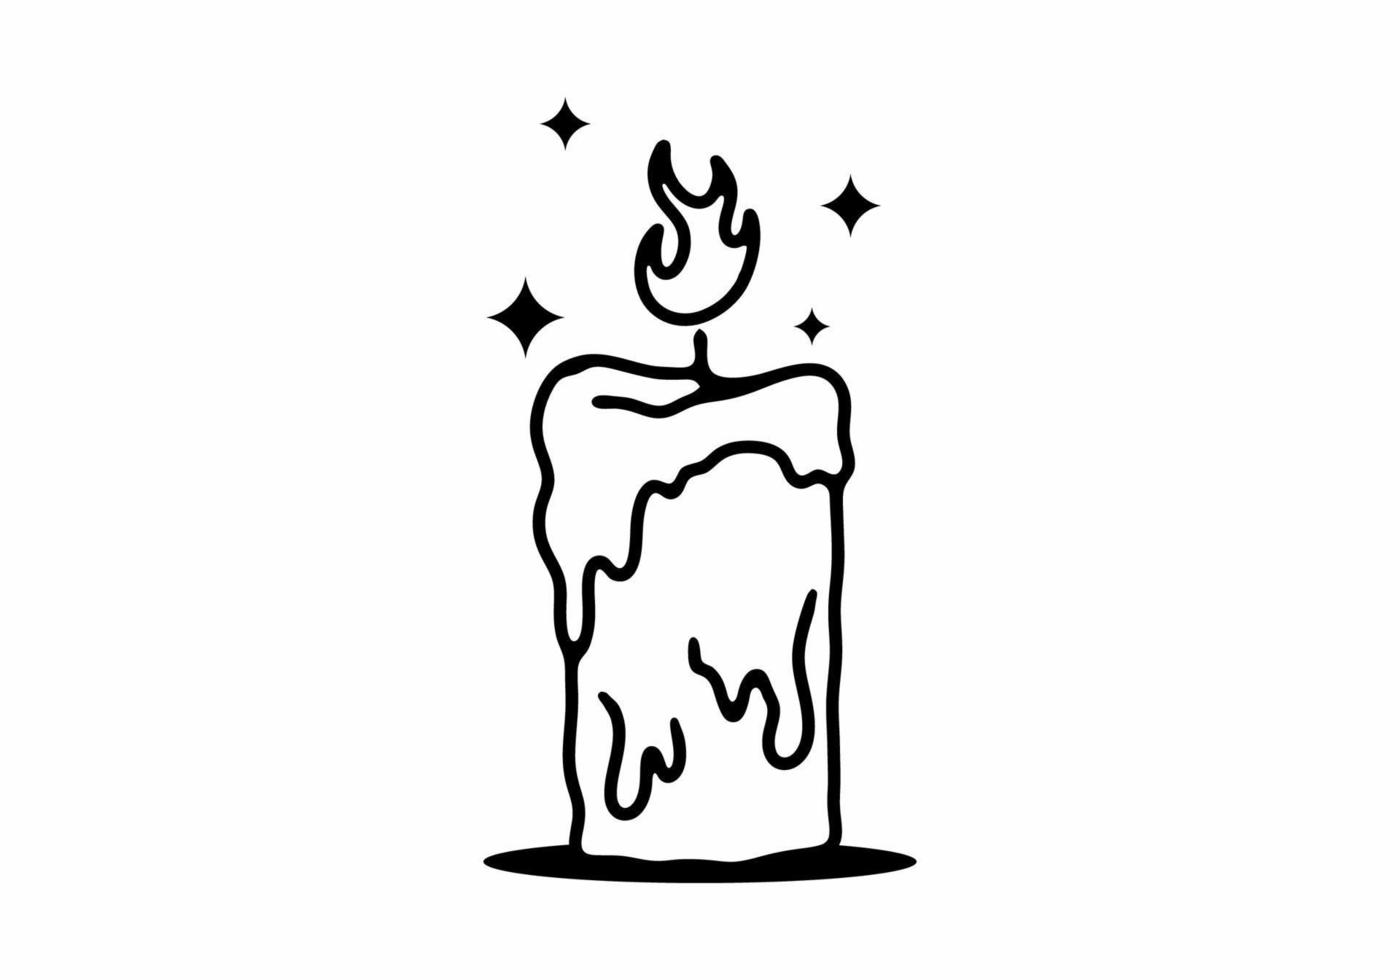 Illustration tattoo of a melted candle vector